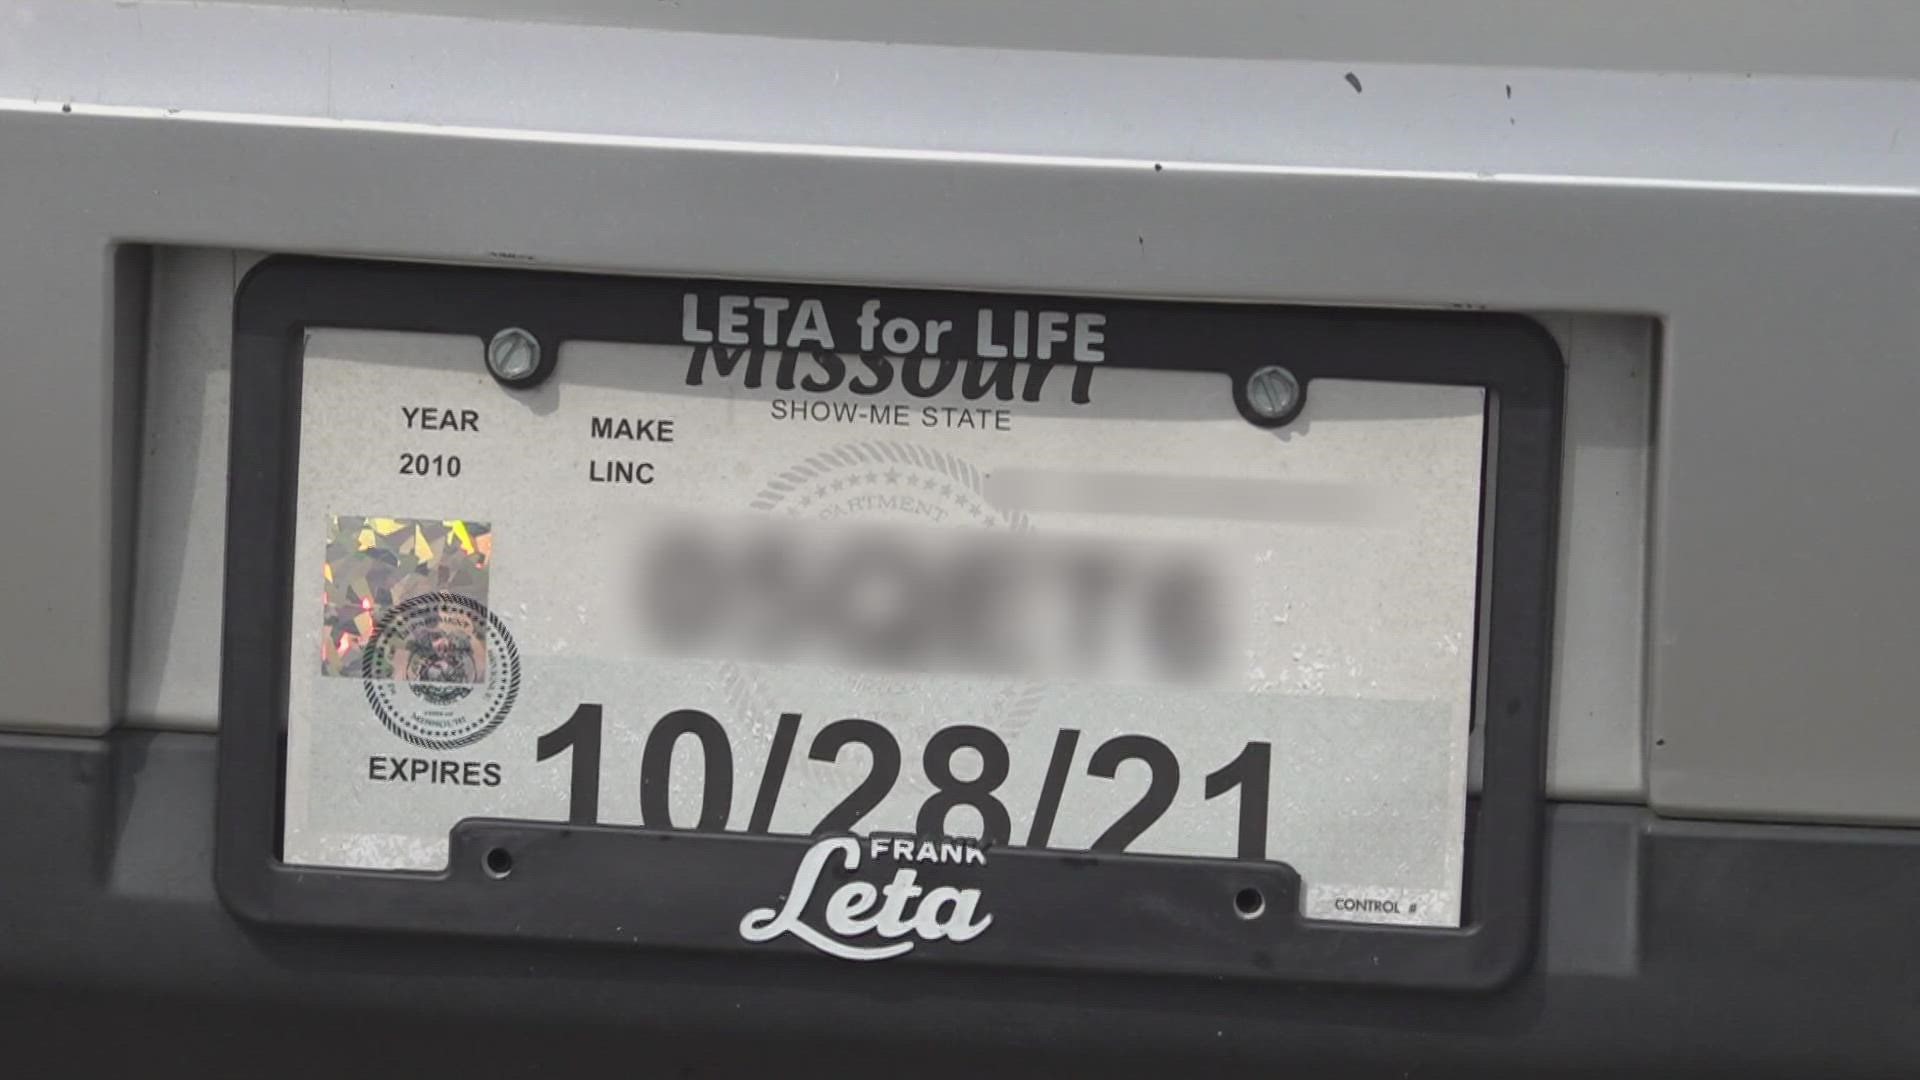 Several 5 On Your Side viewers emailed the Verify team about the legalities, penalties and enforcement of temporary license plates.